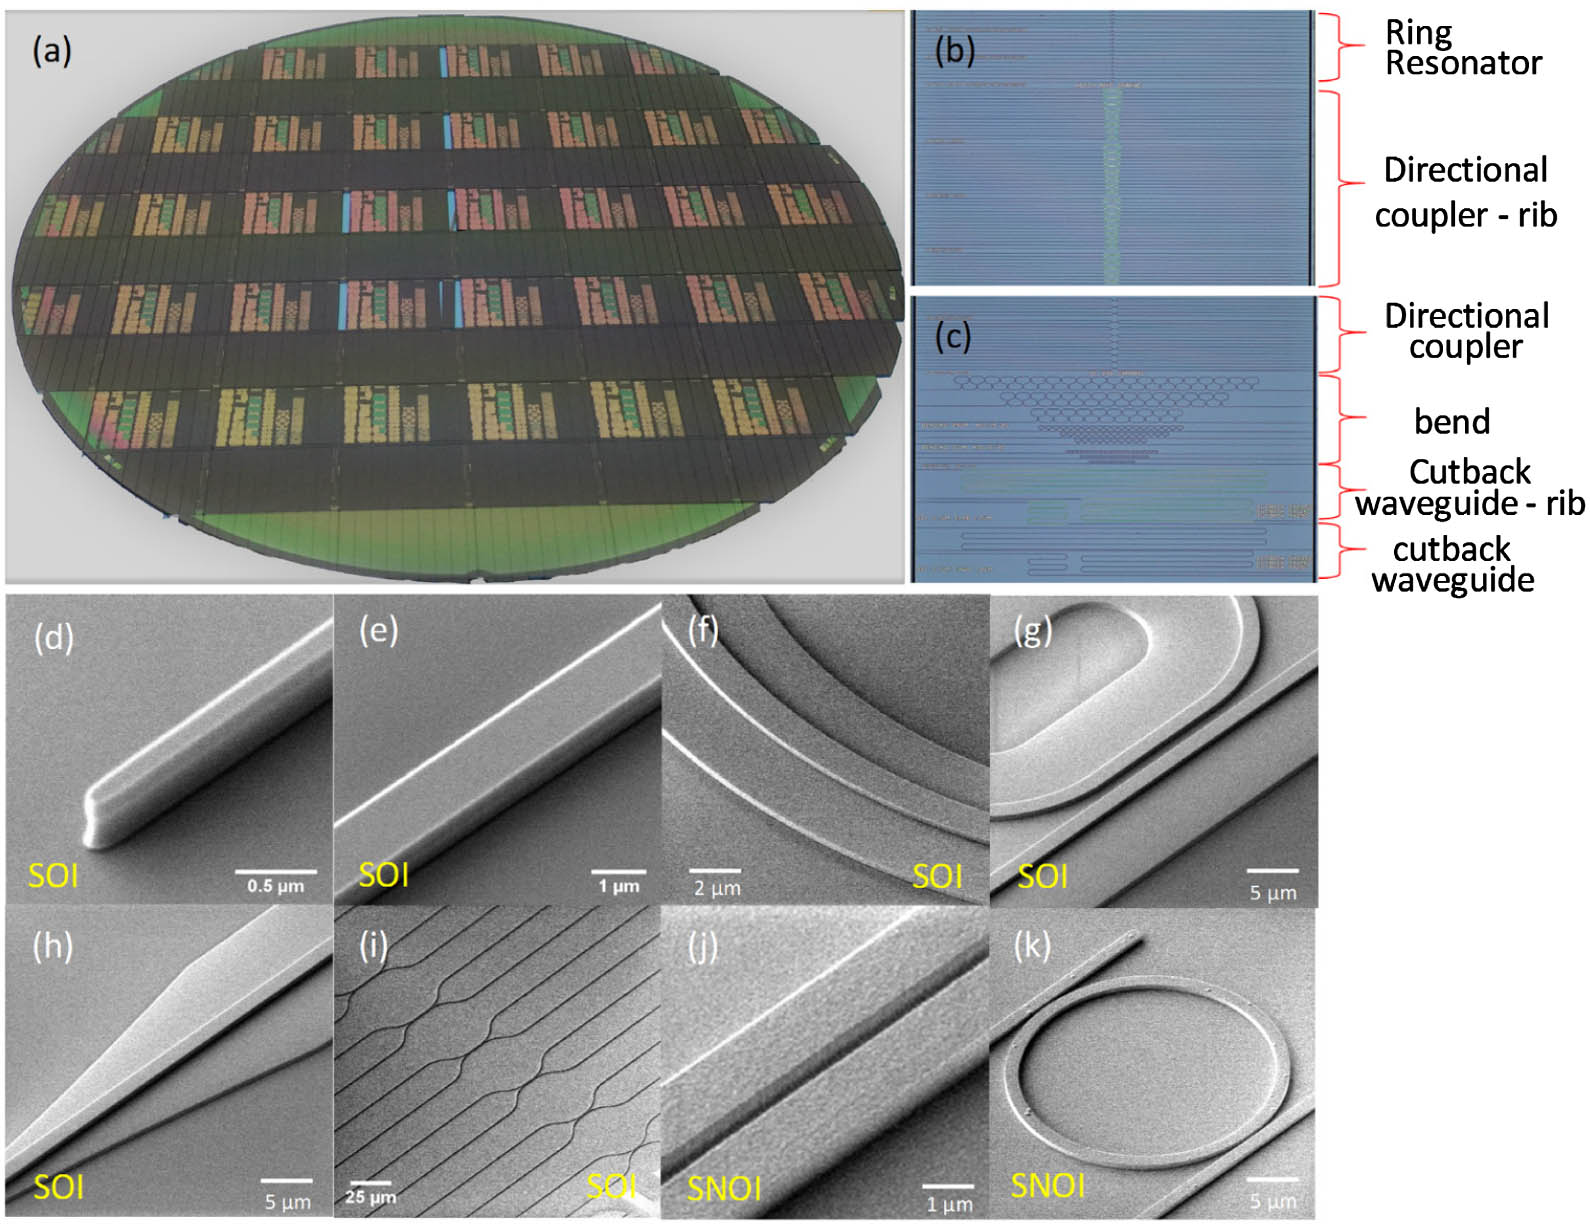 (a) Fabricated 8-in. silicon wafer with MIR devices after wafer dicing for characterization. (b) SOI strip ring resonators and rib DCs. (c) SOI strip DCs, bends, waveguides, and rib waveguides. (d)–(k) SEM images of the fabricated devices. (d) SOI waveguide taper tip. (e) SOI strip waveguide. (f) SOI rib waveguide. (g) SOI rib DC. (h) SOI strip to rib converter. (i) SOI strip DC array. (j) SNOI DC. (k) SNOI add–drop ring resonator.